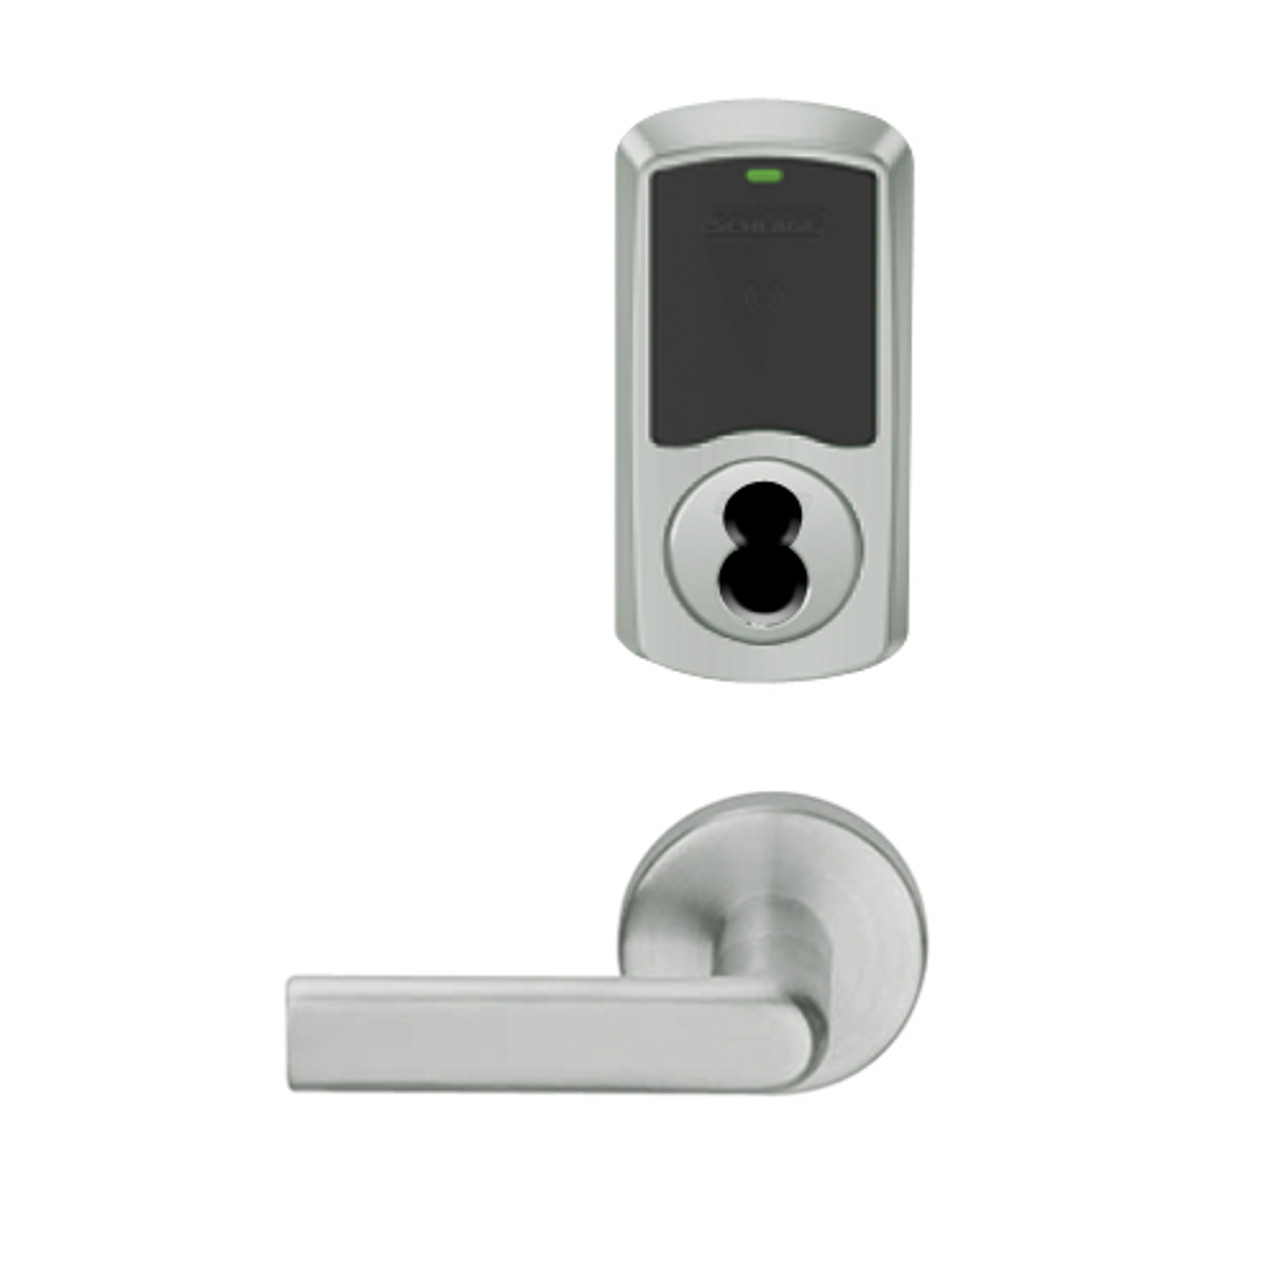 LEMD-GRW-J-01-619-00C Schlage Privacy/Apartment Wireless Greenwich Mortise Deadbolt Lock with LED and 01 Lever Prepped for FSIC in Satin Nickel